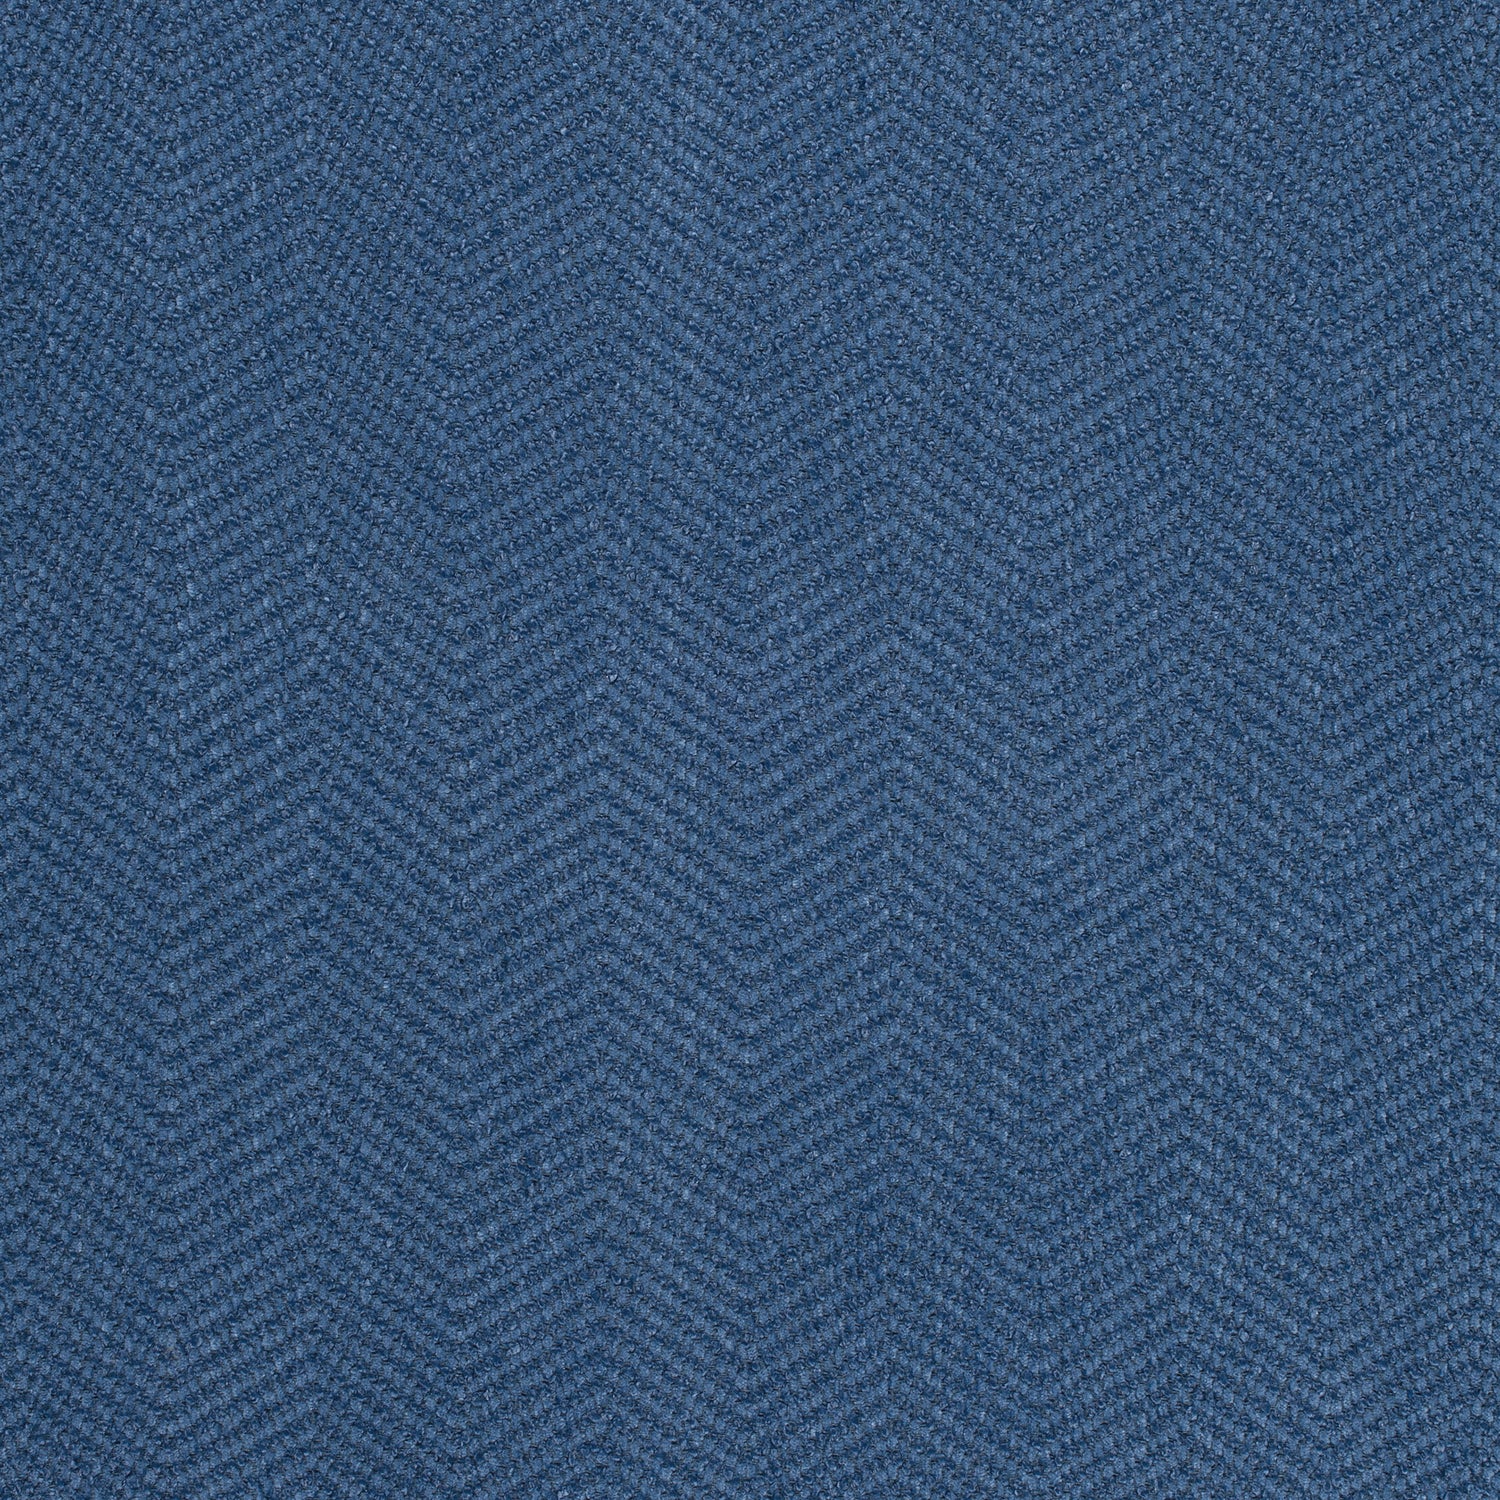 Dalton Herringbone fabric in royal blue color - pattern number W80629 - by Thibaut in the Pinnacle collection